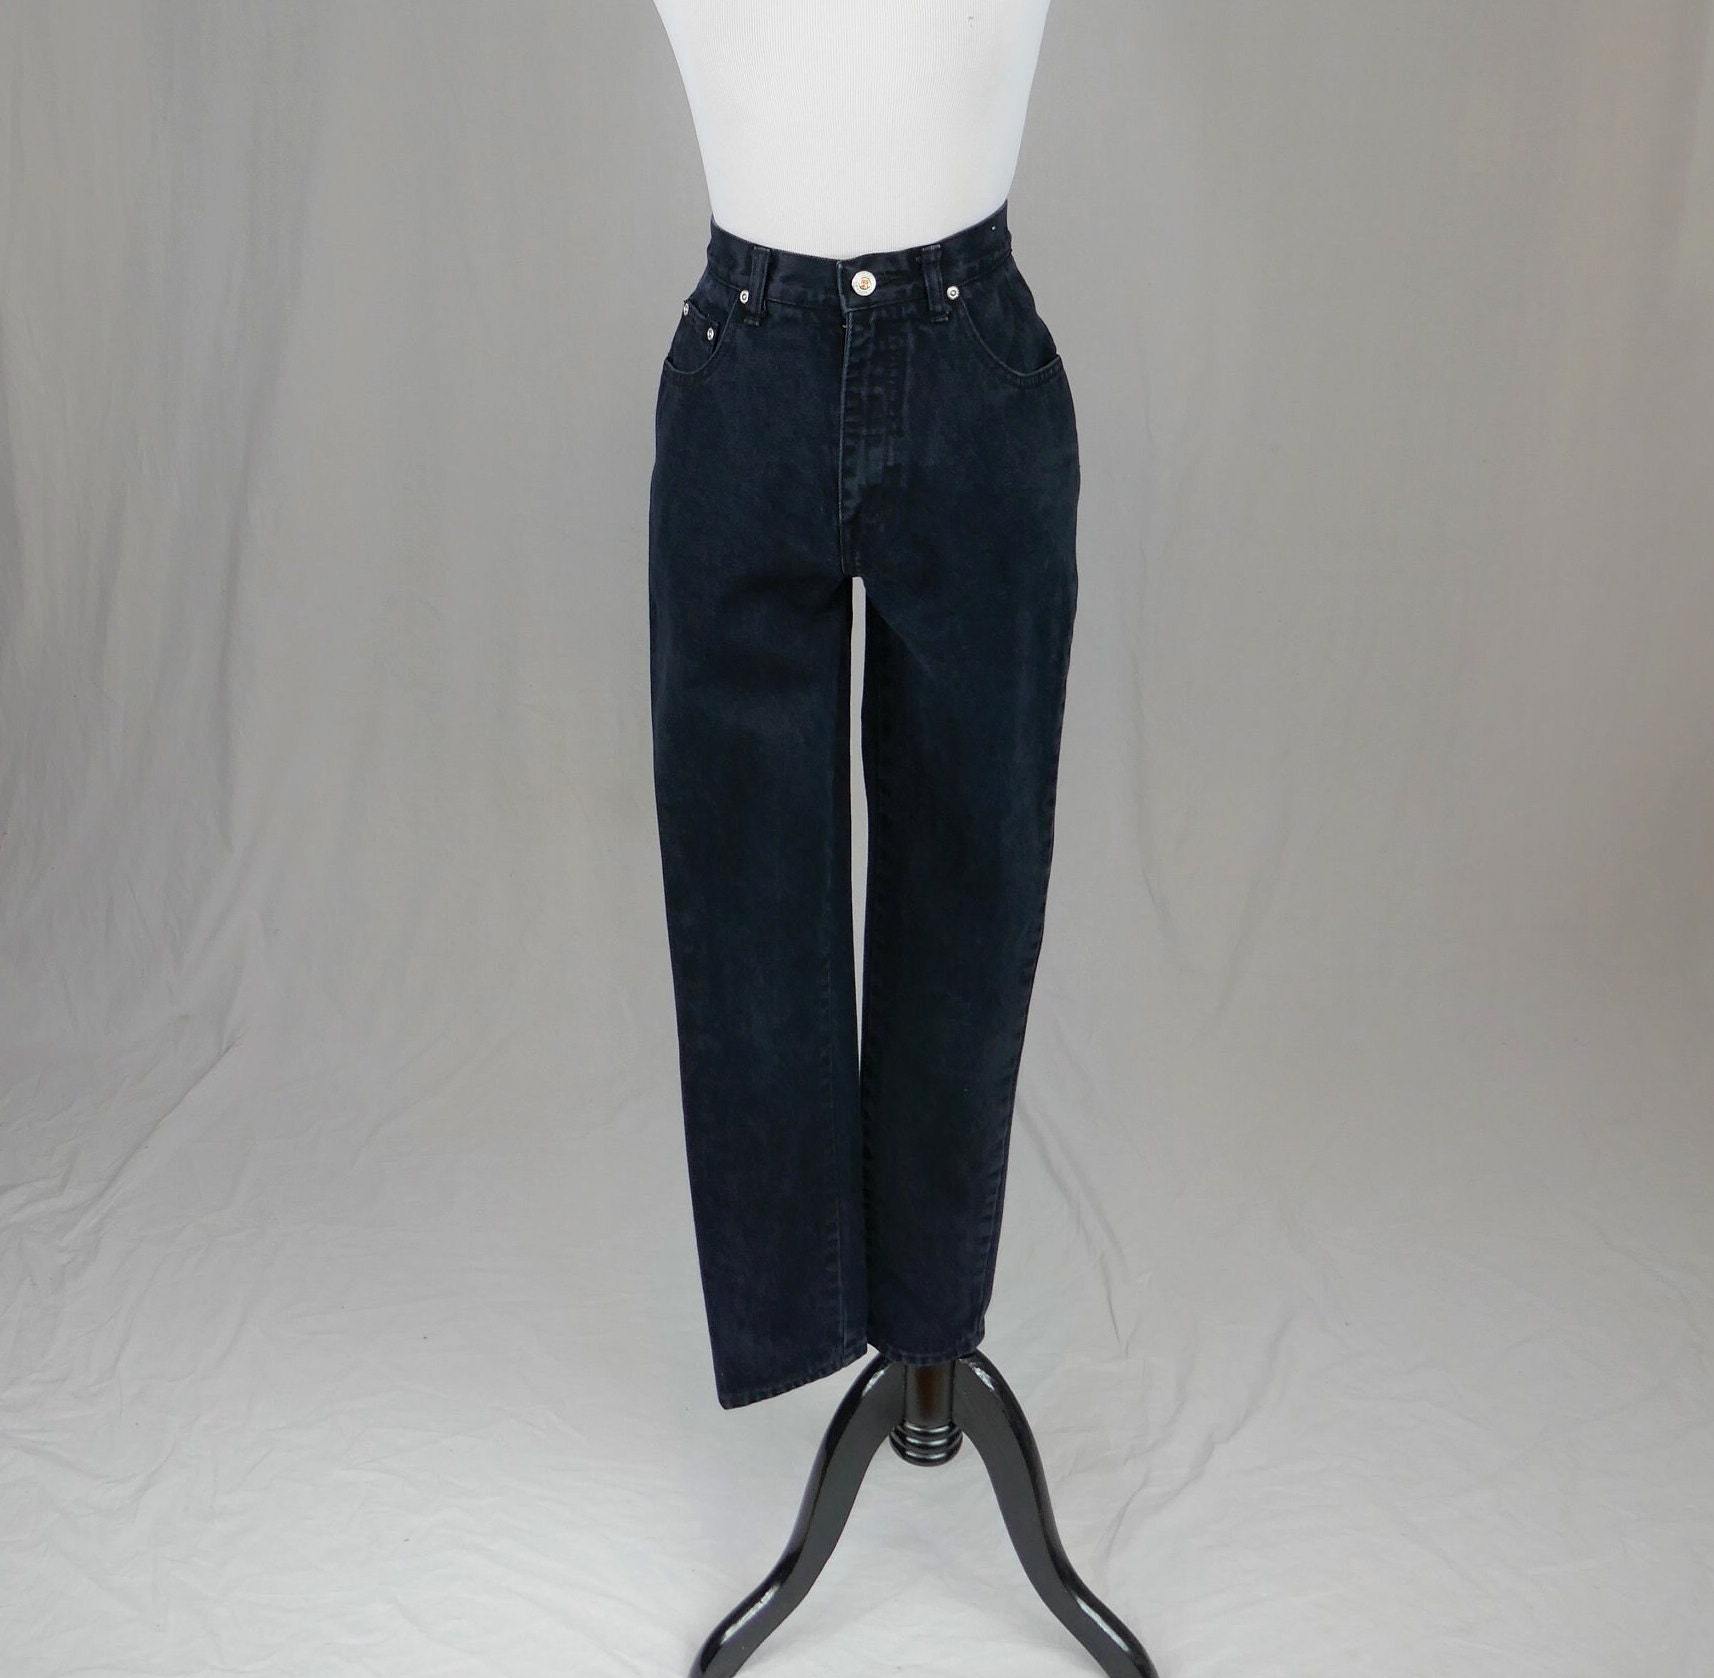 Tall Girls Vintage Side Button Mid Rise Flare Jeans by Foxy -37” Inseam -  Size 6